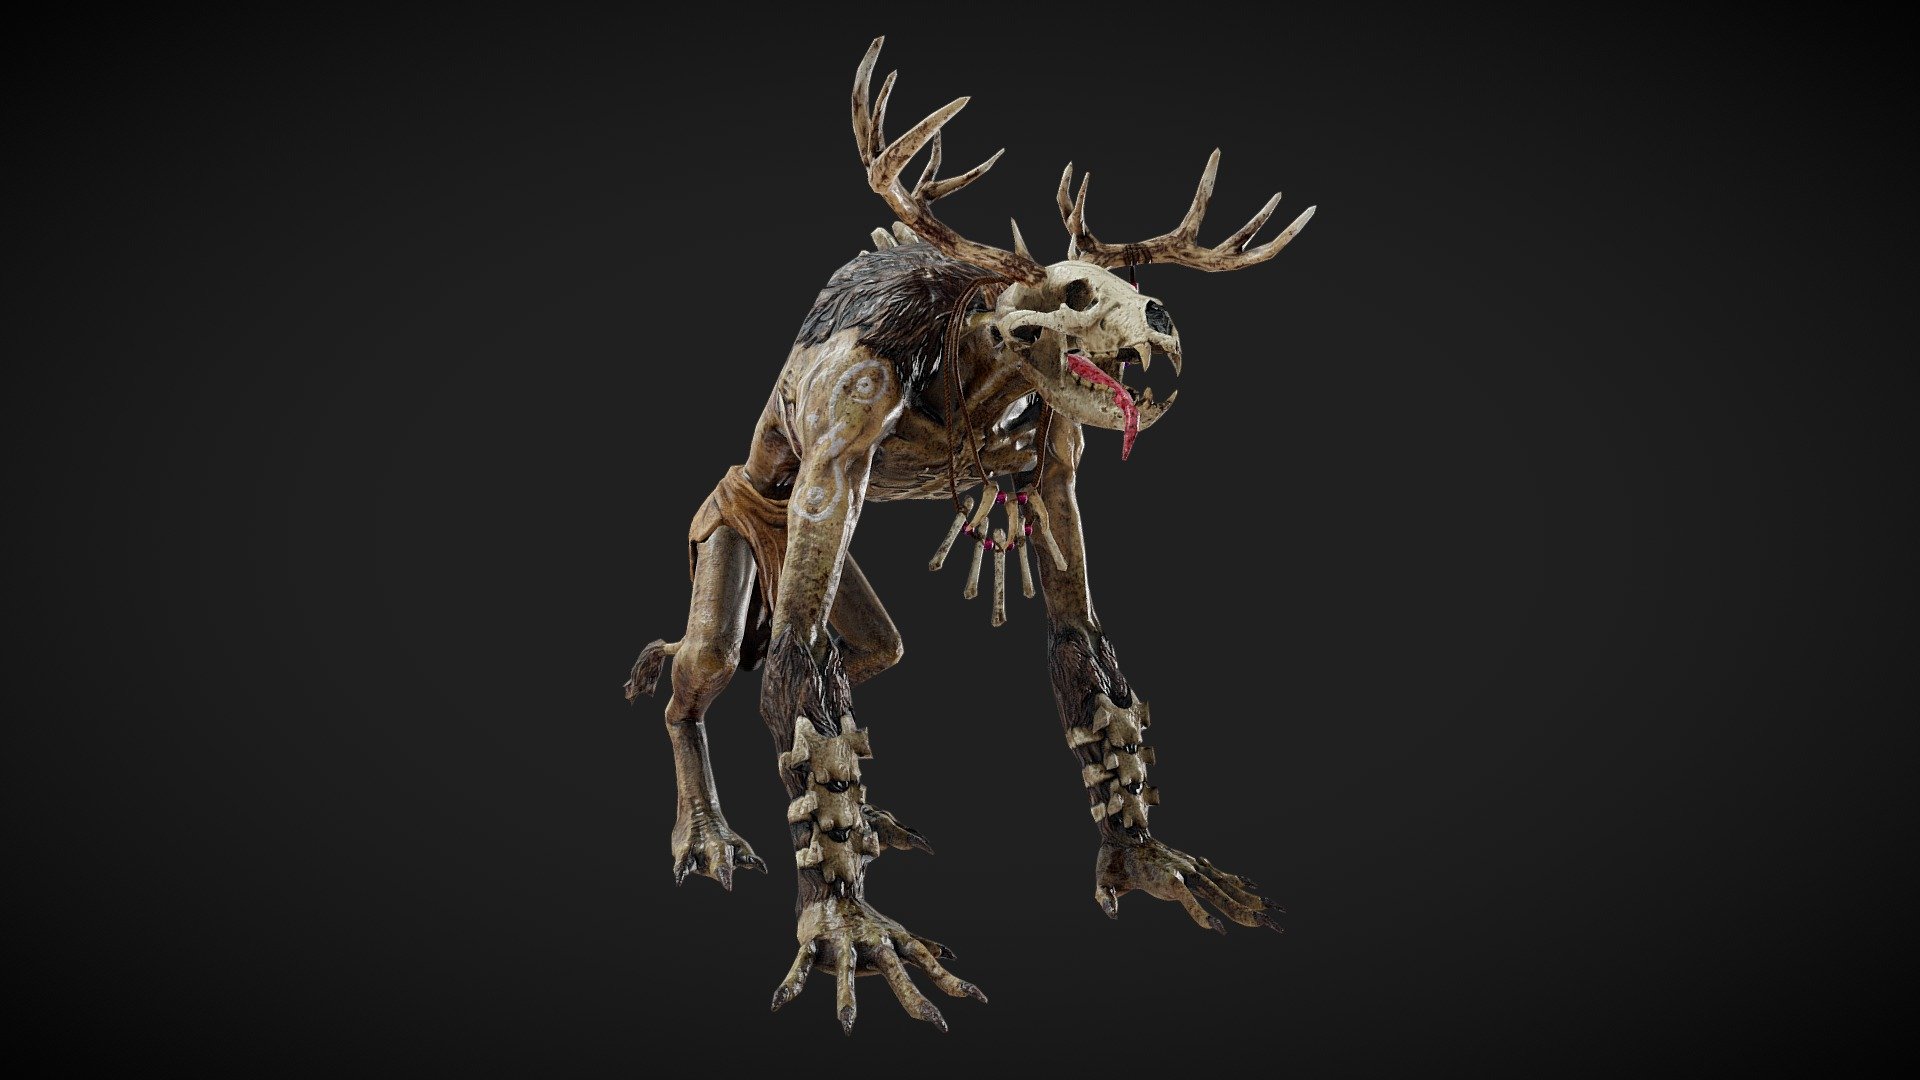 Wendigo was made as halloween event animal for the mobile game Wild Hunt for Ten Square Games. Sculpture made in Zbrush, retopology and uv-mapping in Blender, textures in Substance Painter 3d model